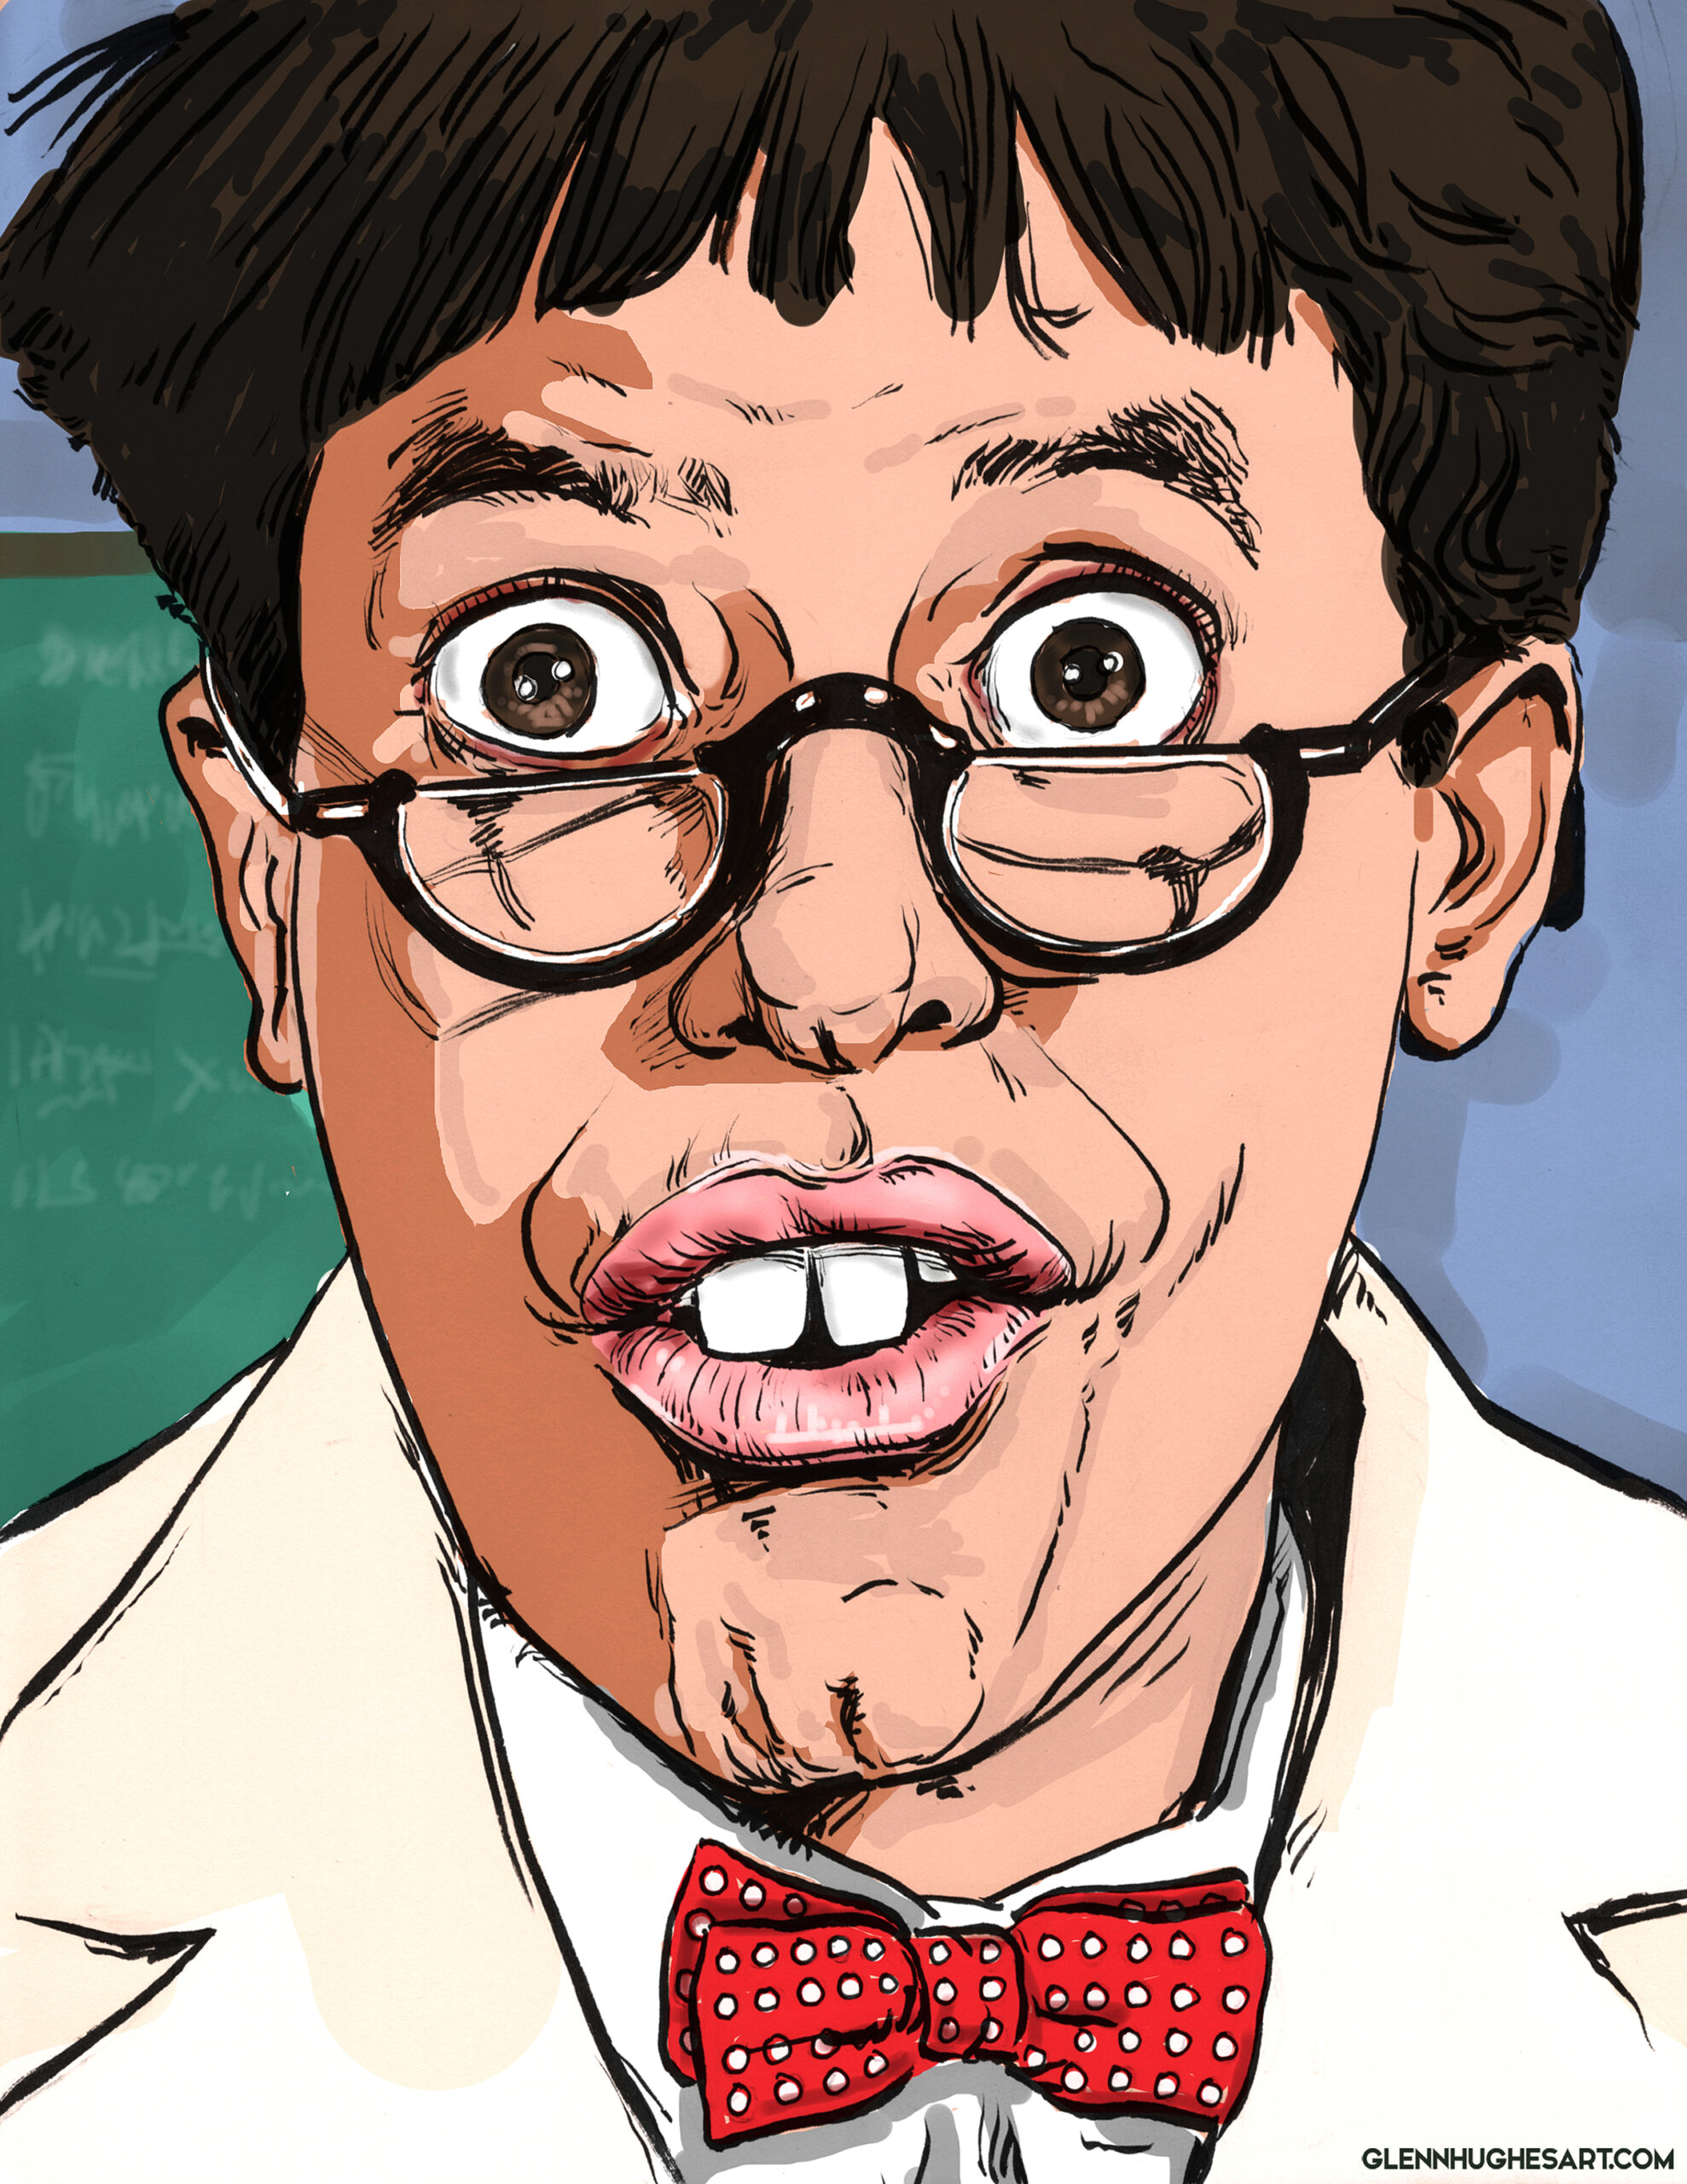 Jerry Lewis - The Nutty Professor